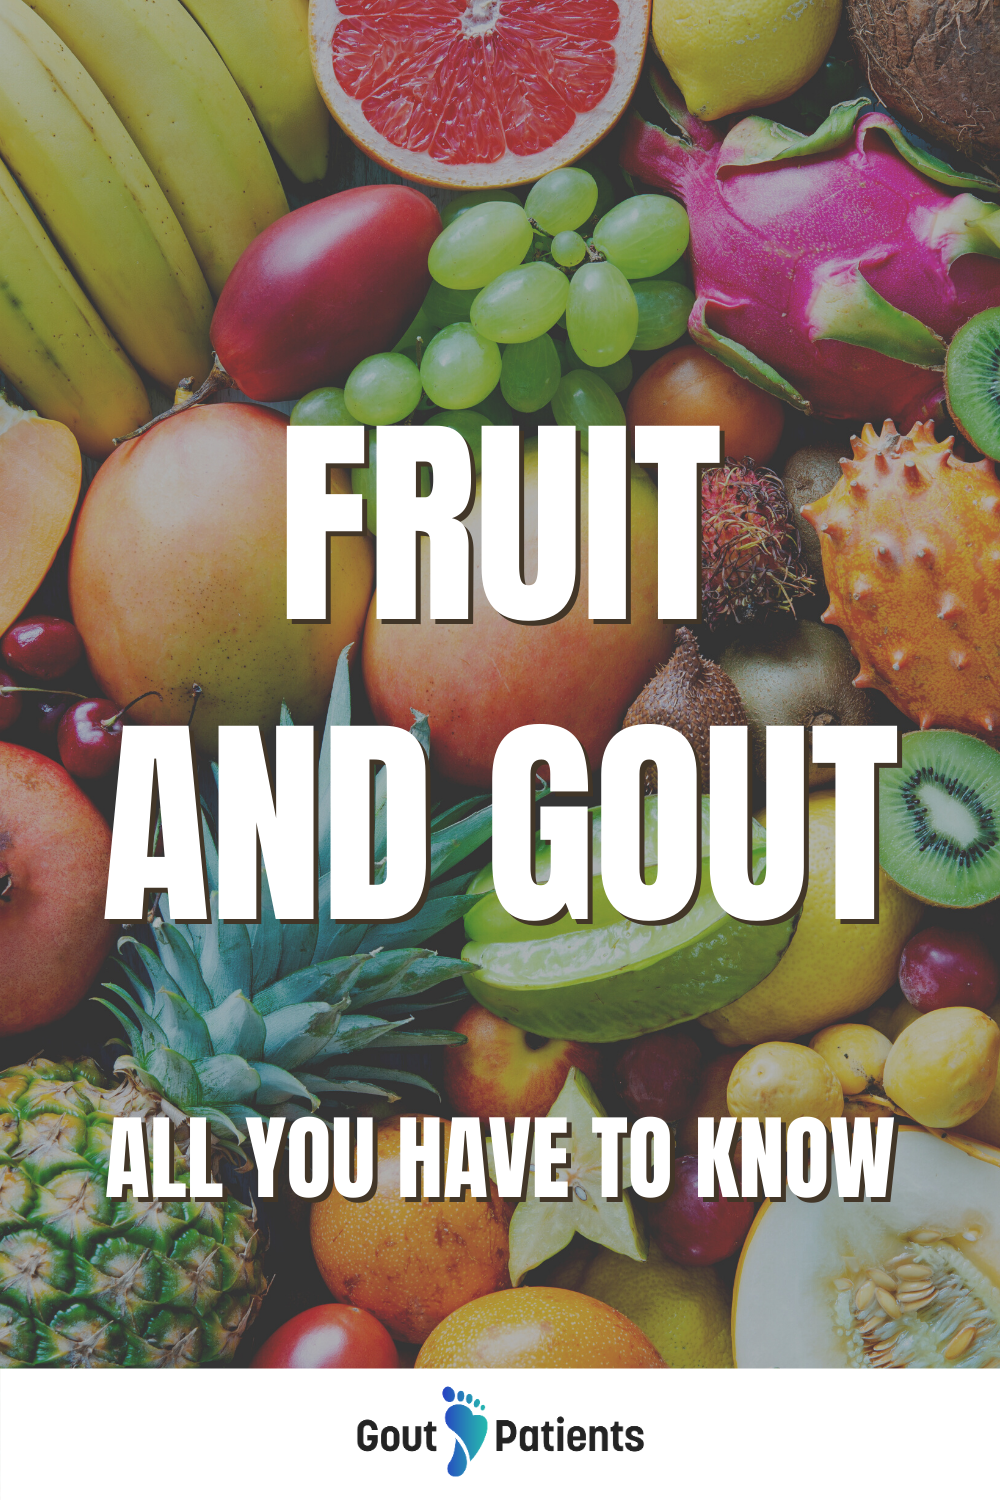 Fruit and gout